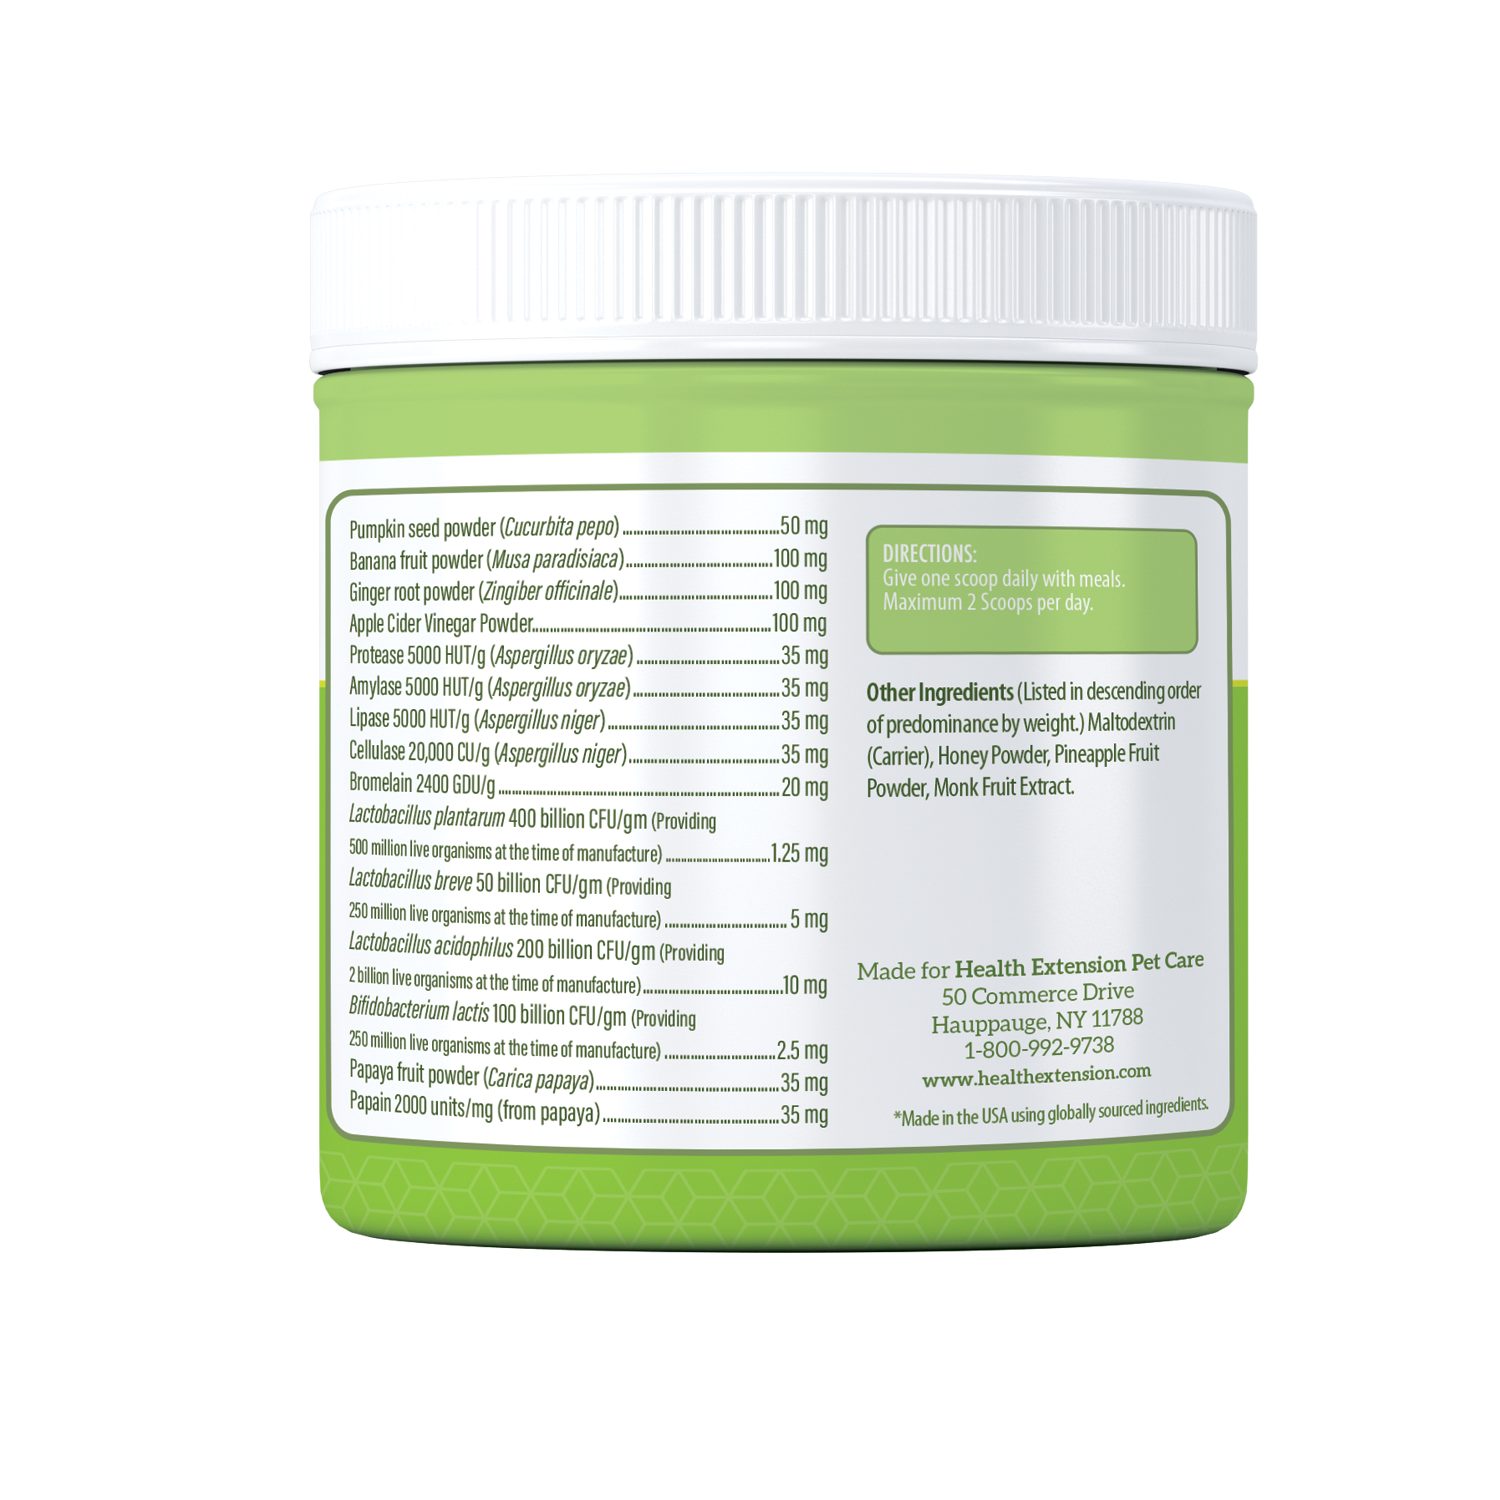 BELLY + IMMUNITY Digestive Probiotic Supplement